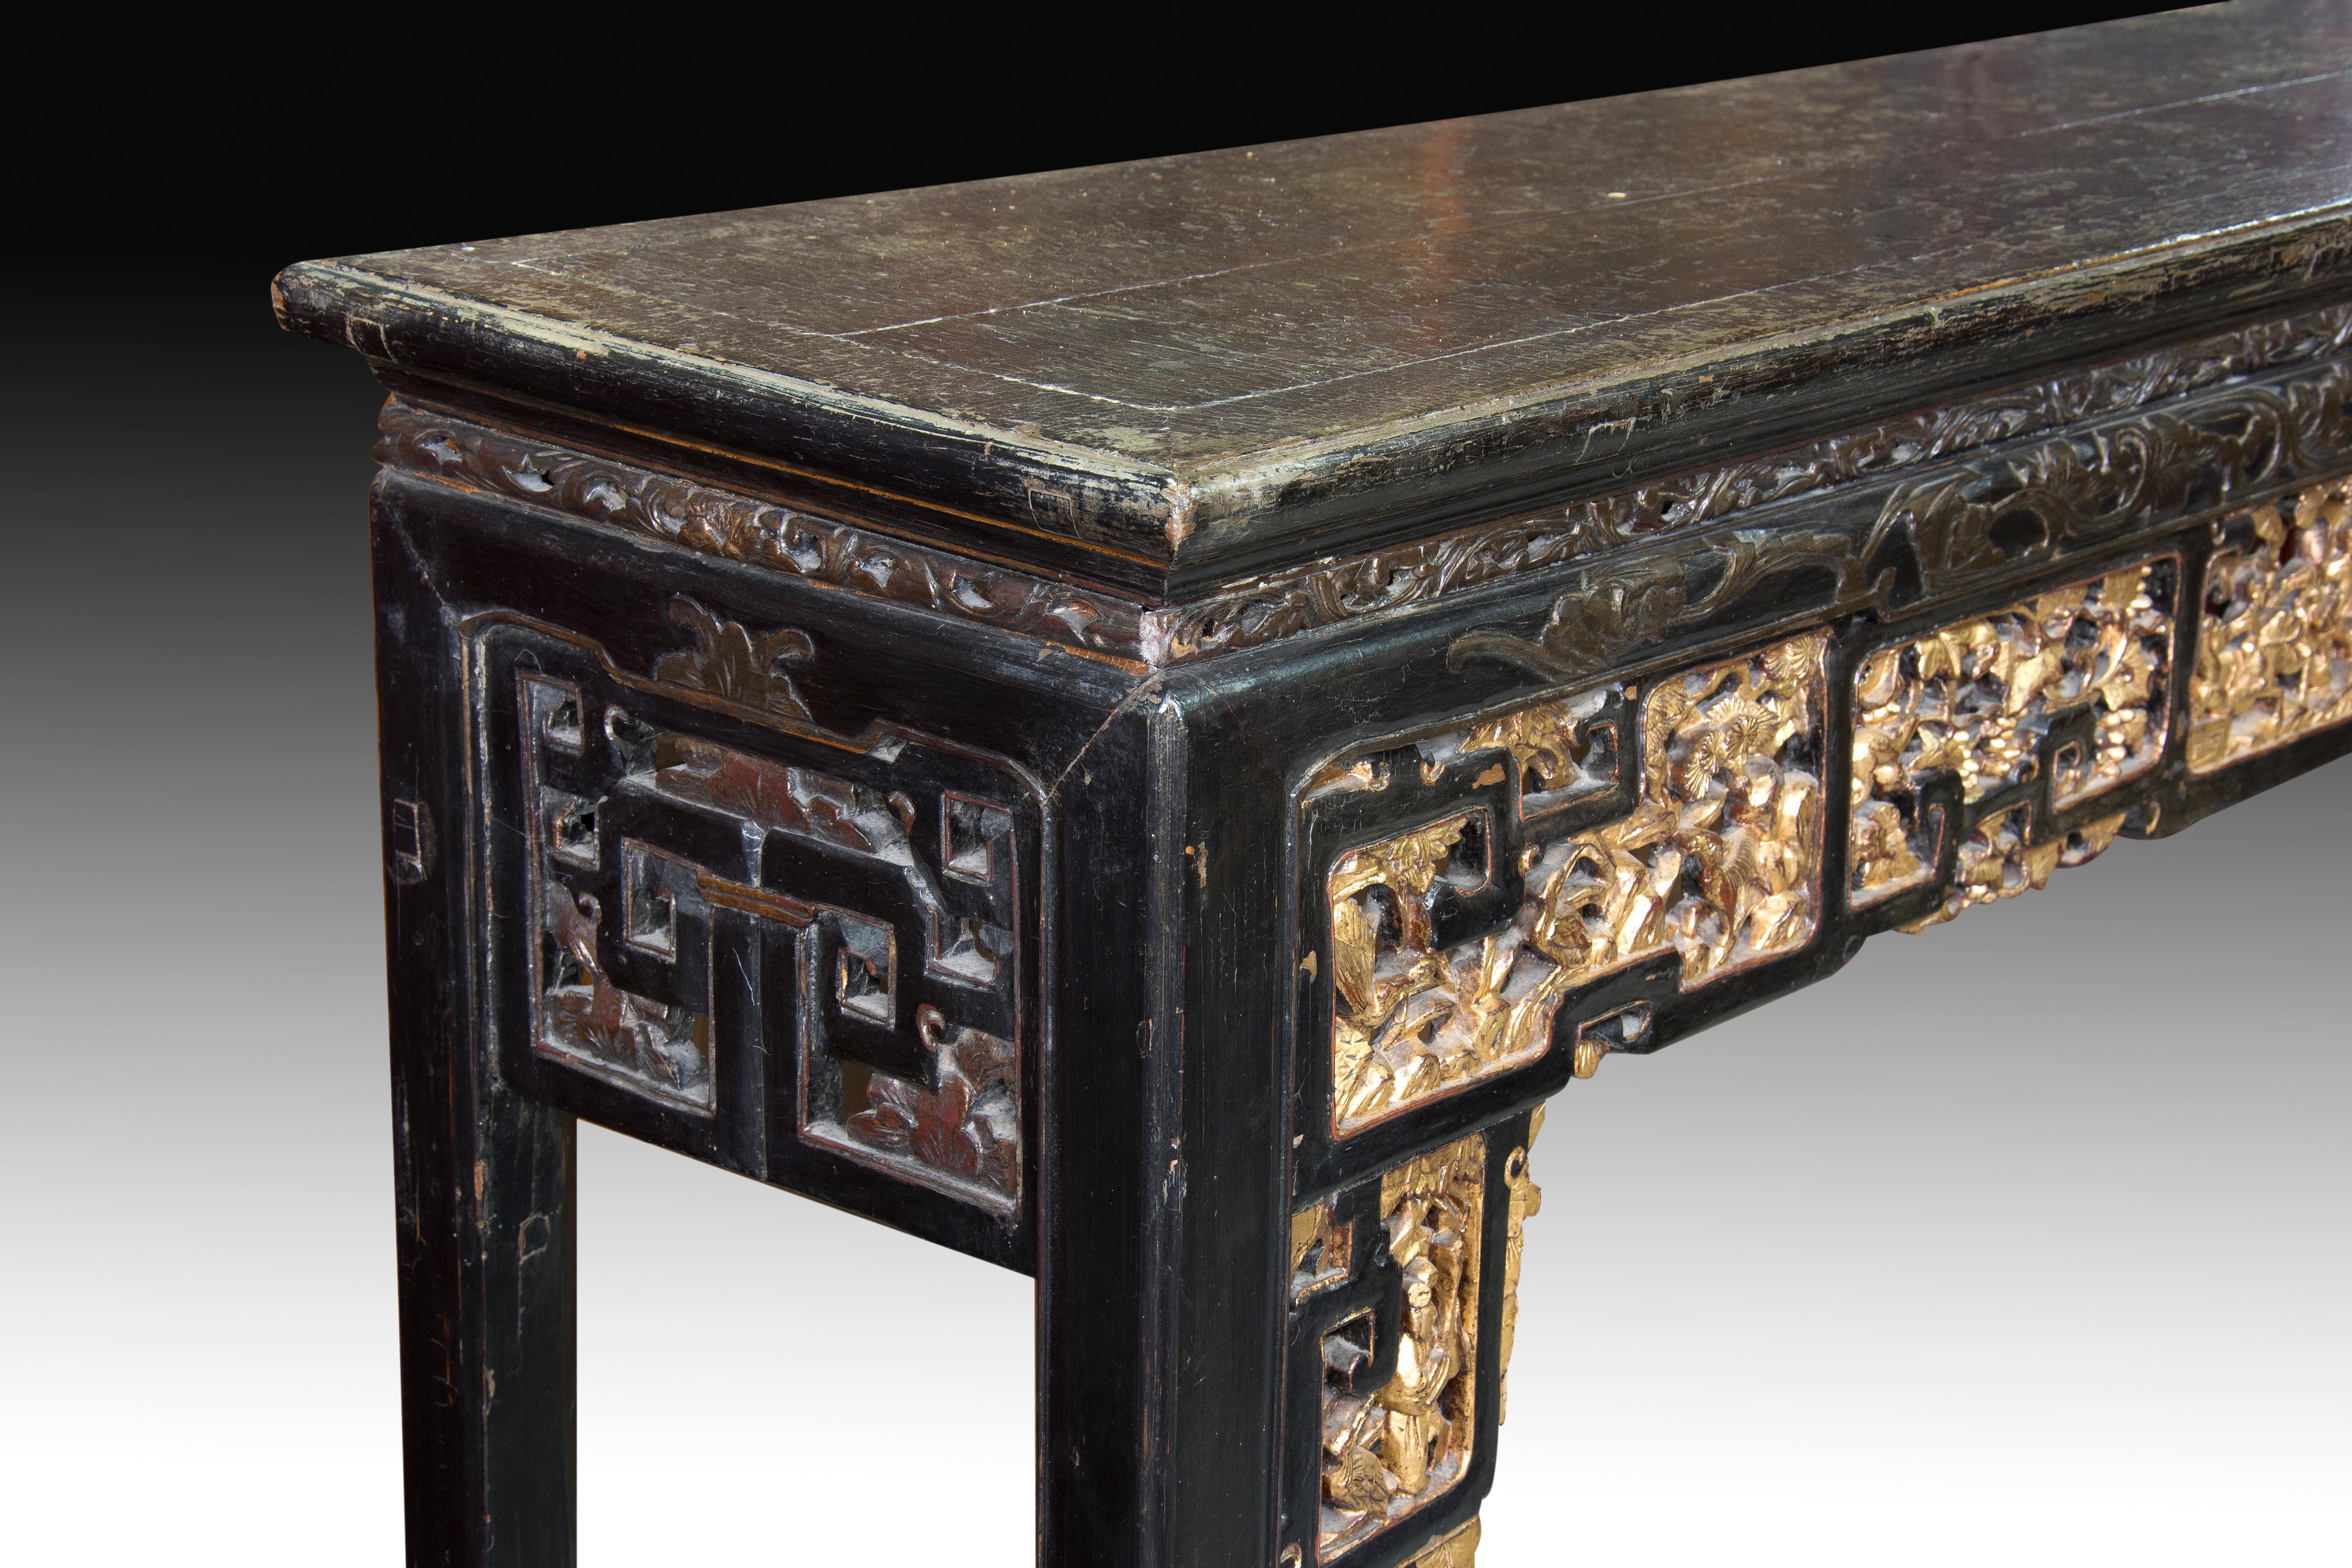 Rectangular table of smooth board with four square legs decorated with fine carvings organized in geometric shapes. In front, these have been gilded to enhance them. Both these figurative compositions and the lines and proportions of the furniture